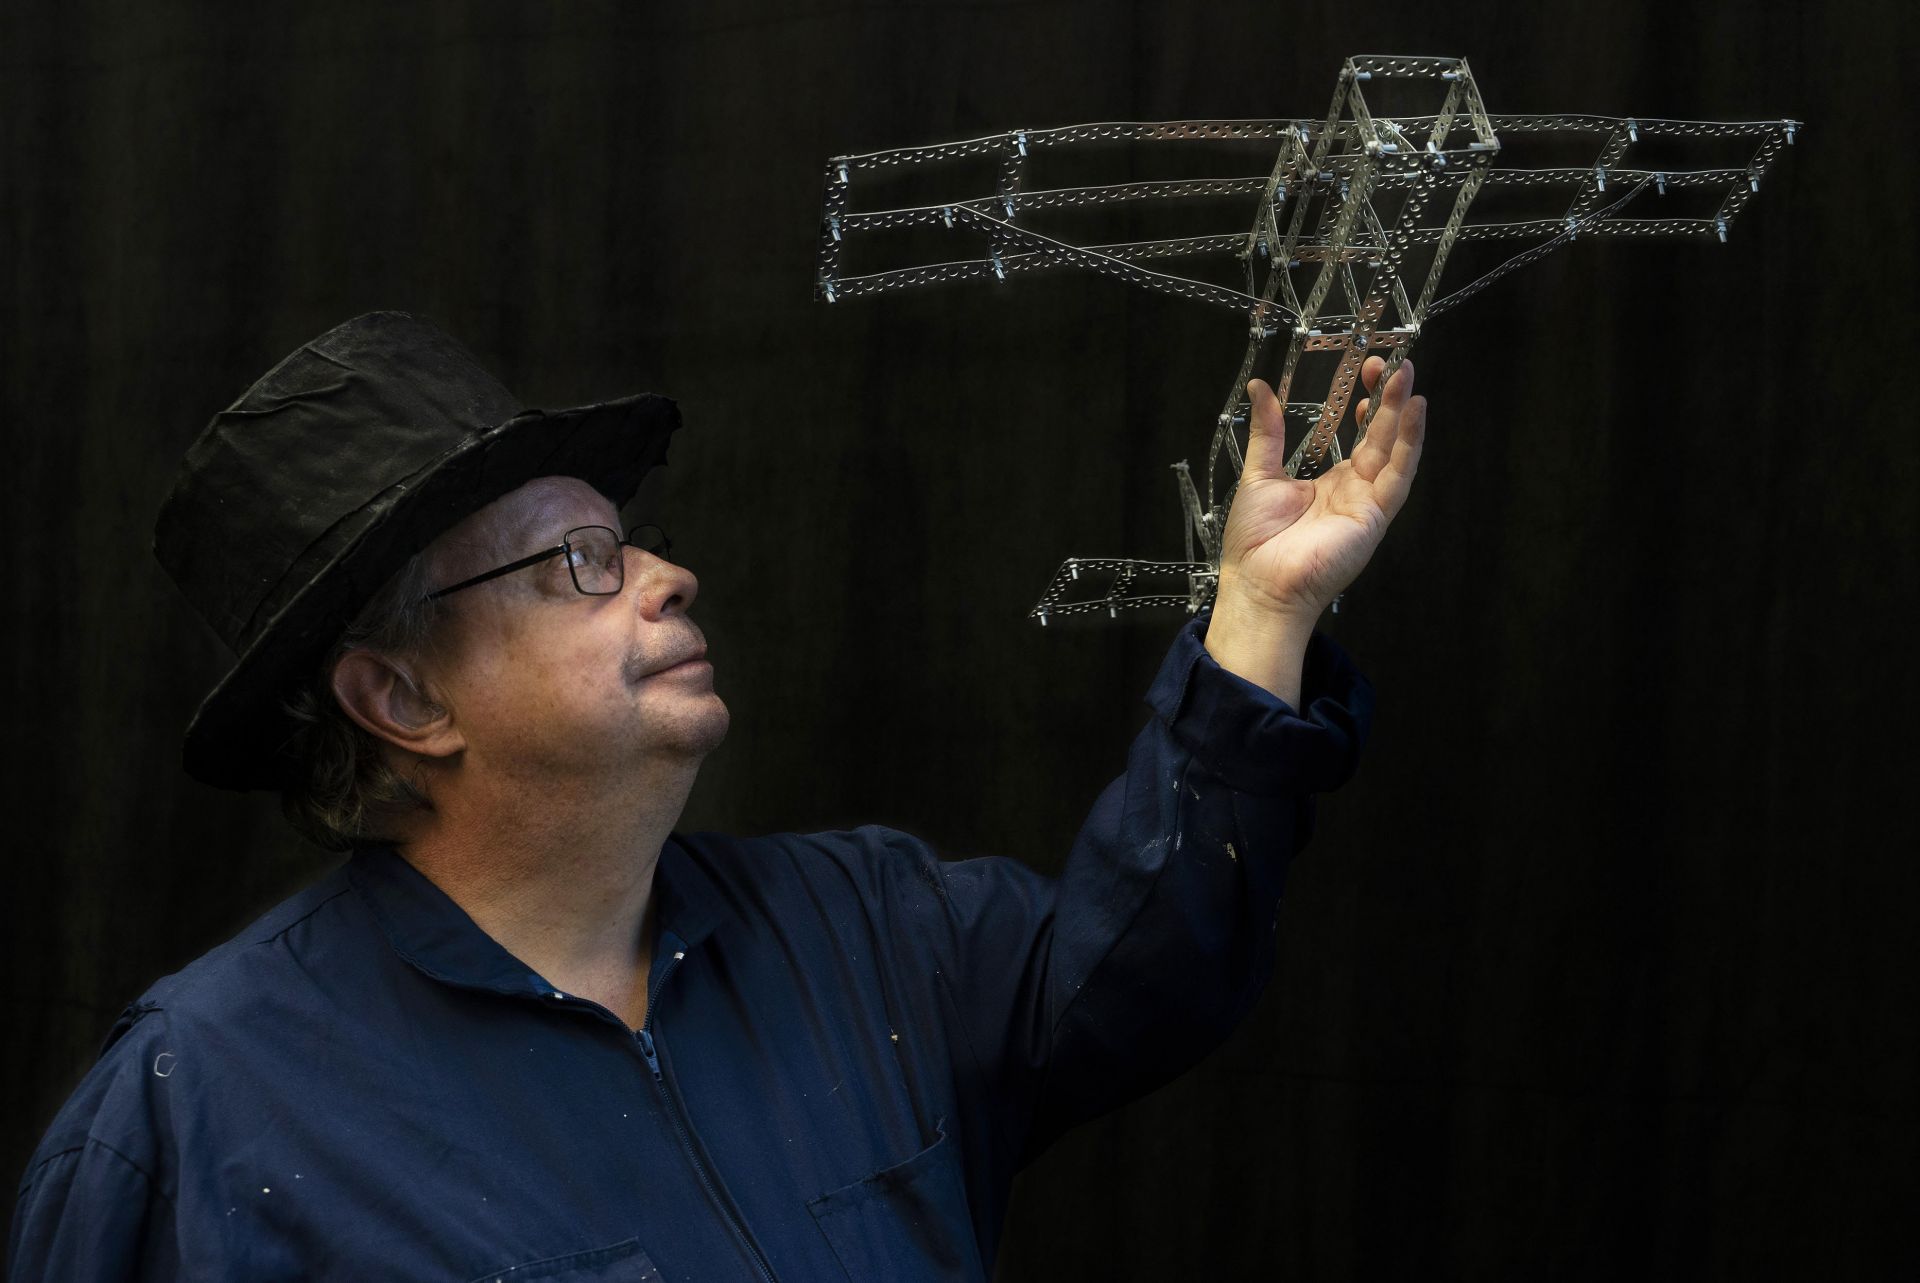 DuvTeatern actor Krister Ekebom wears a top hat, gazing towards his miniature airplane crafted from perforated steel banding.